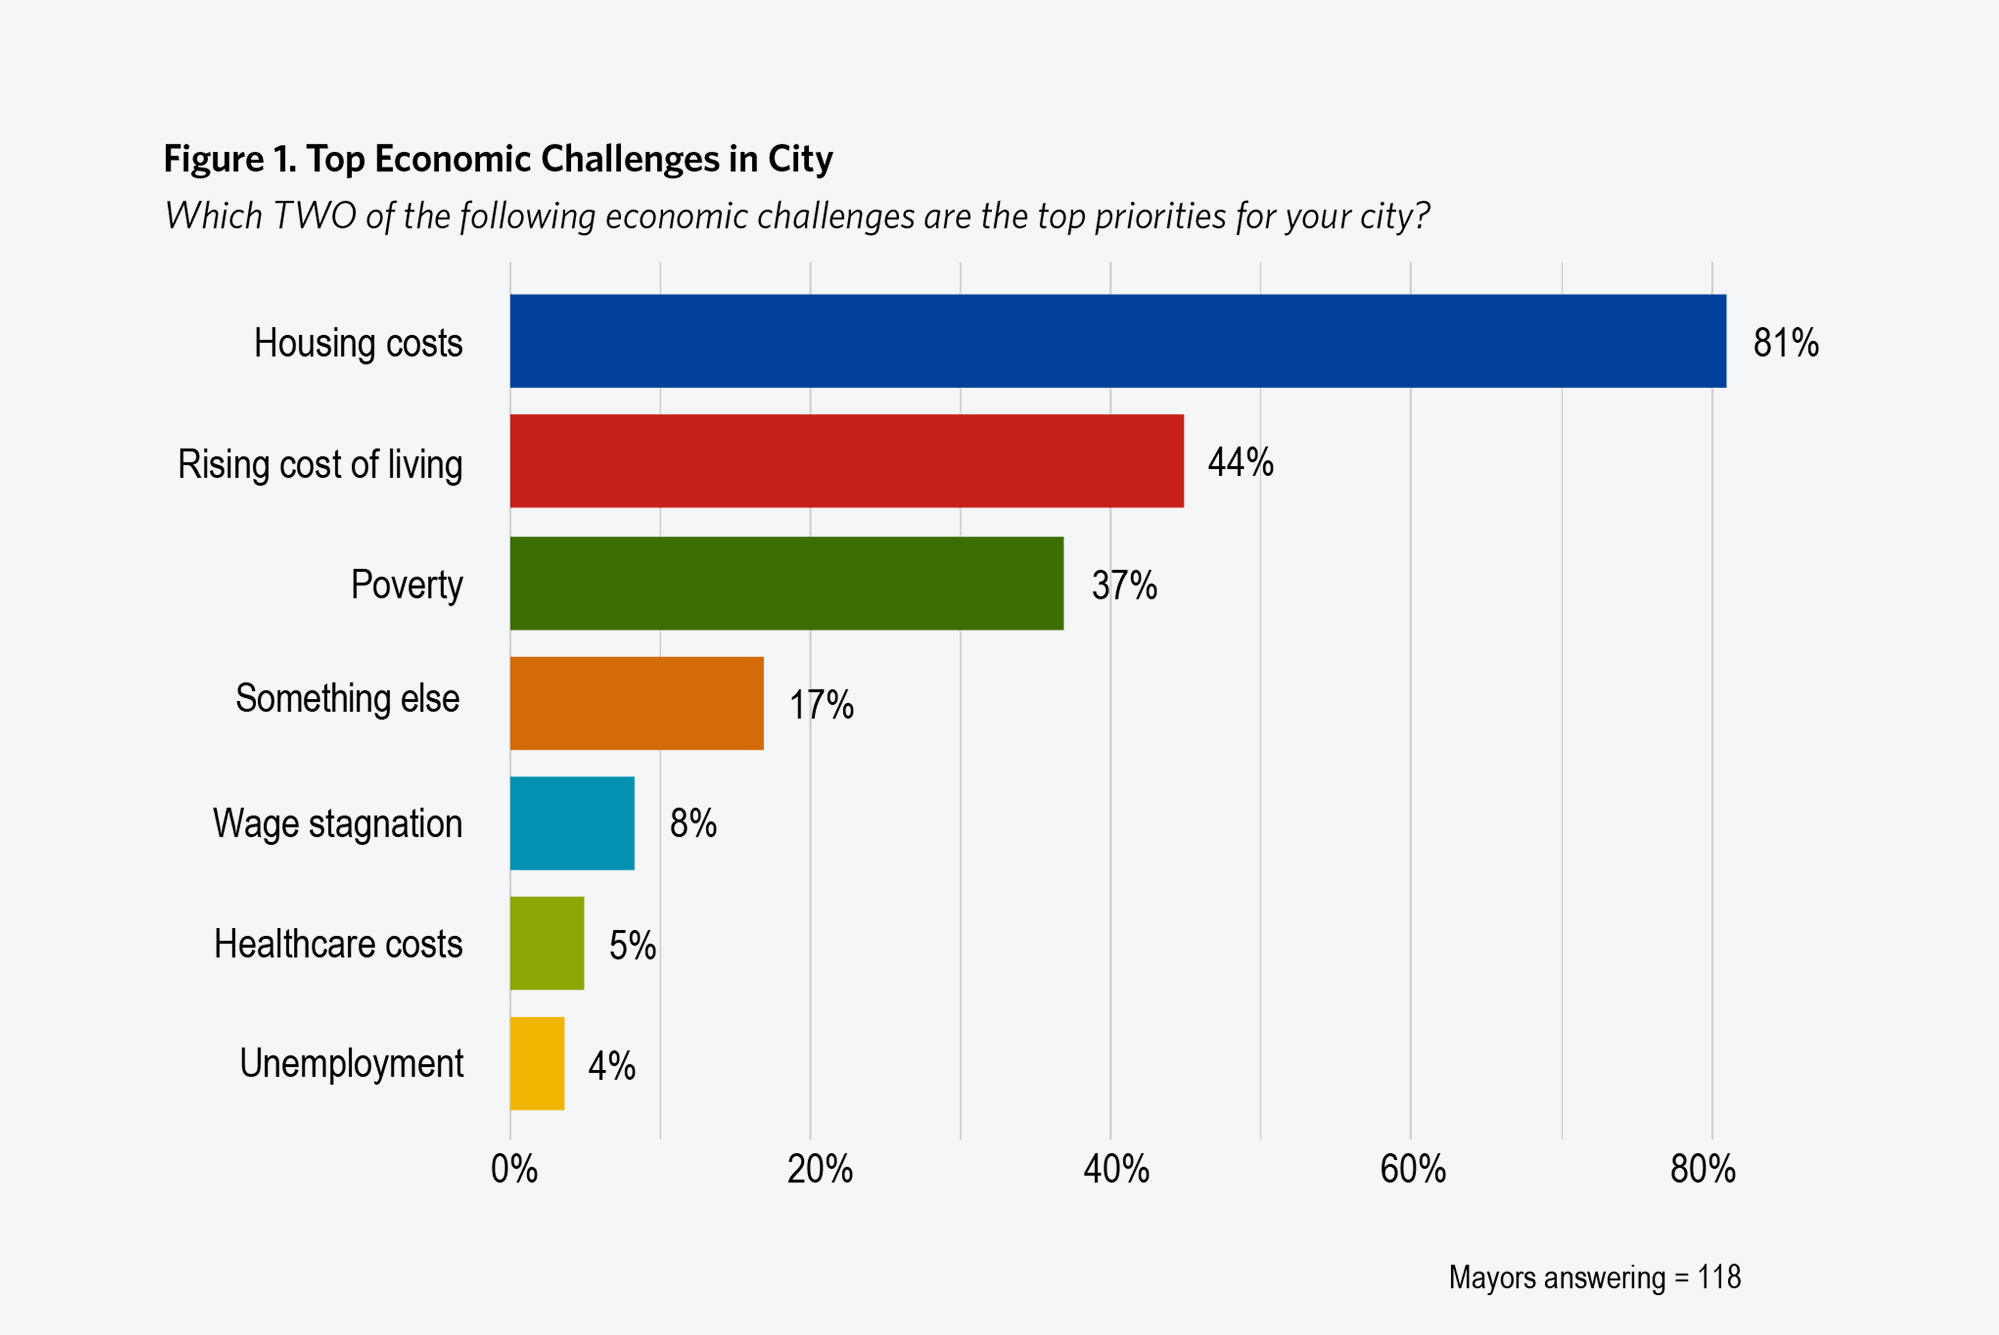 Image: A bar graph indicating the responses to, "Which TWO of the following economic challenges are the top priorities for your city?". The answers are as follows: Housing costs at 81%; Rising cost of living at 44%; Poverty at 37%; Something else at 17%; Wage stagnation at 8%; Healthcare costs at 5%; Unemployment at 4% with 118 mayors responding to the question.